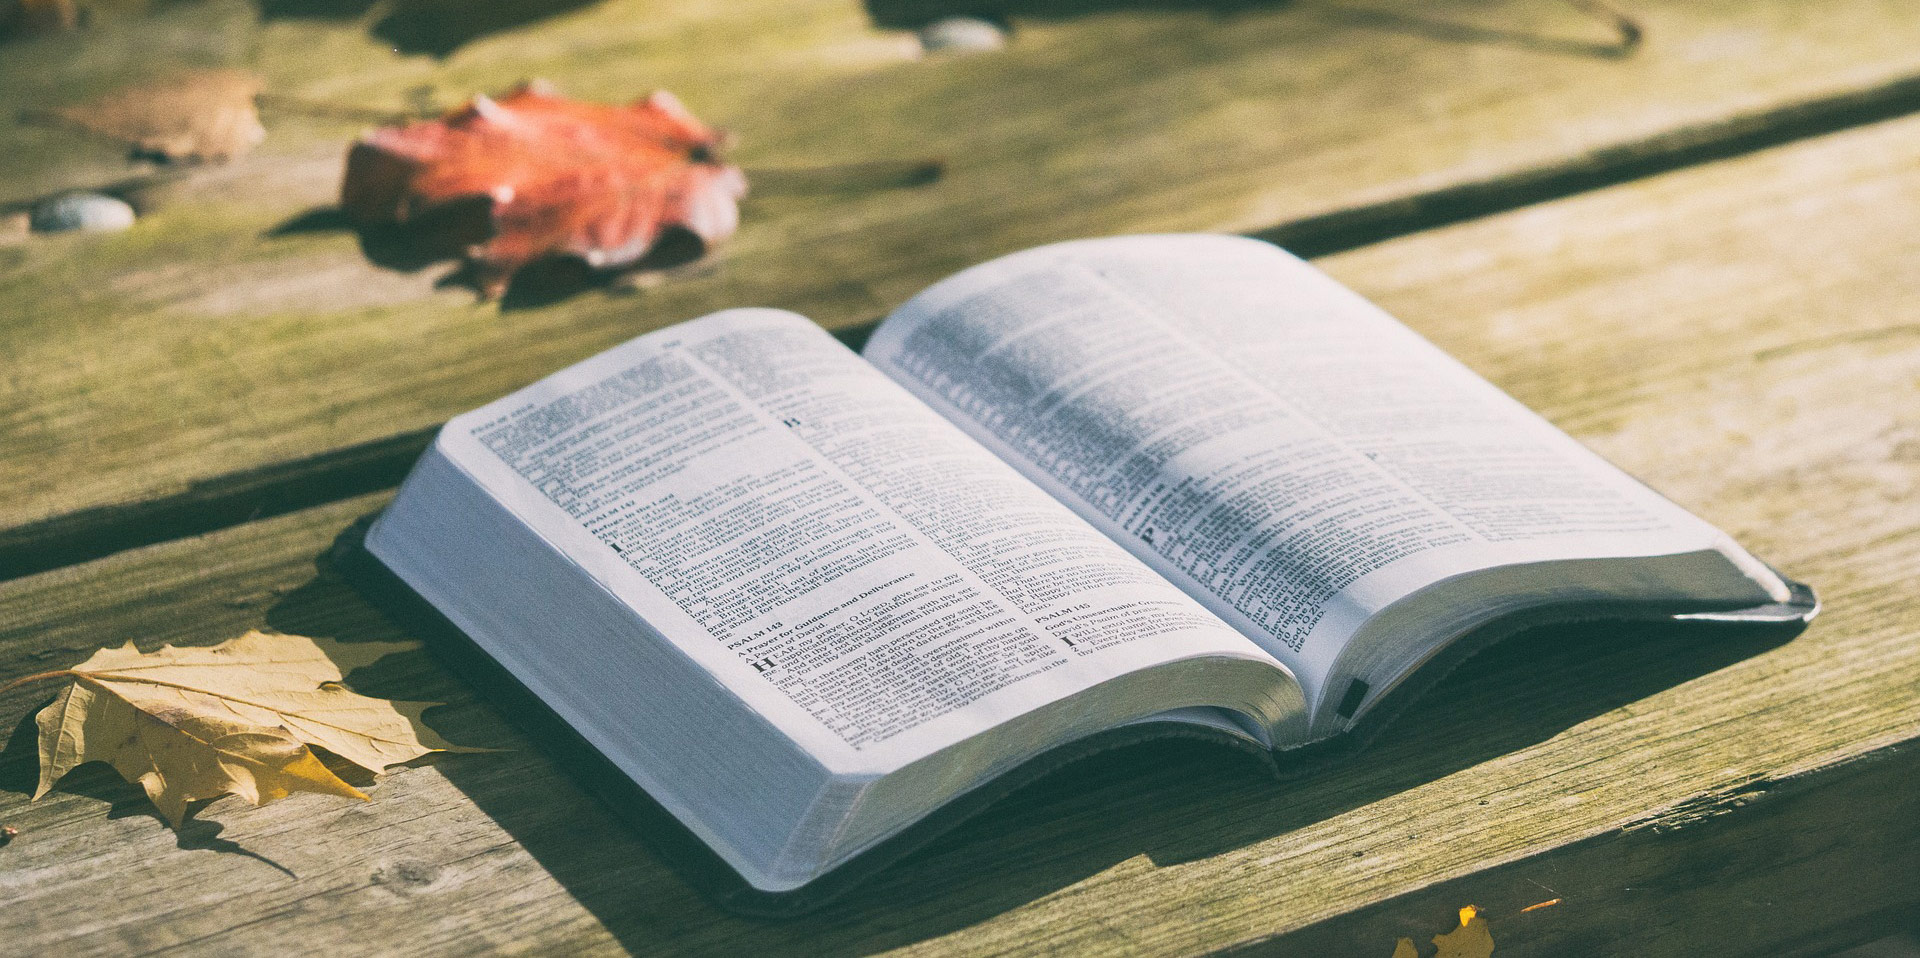 Photo of Bible by Pexels via Pixabay.